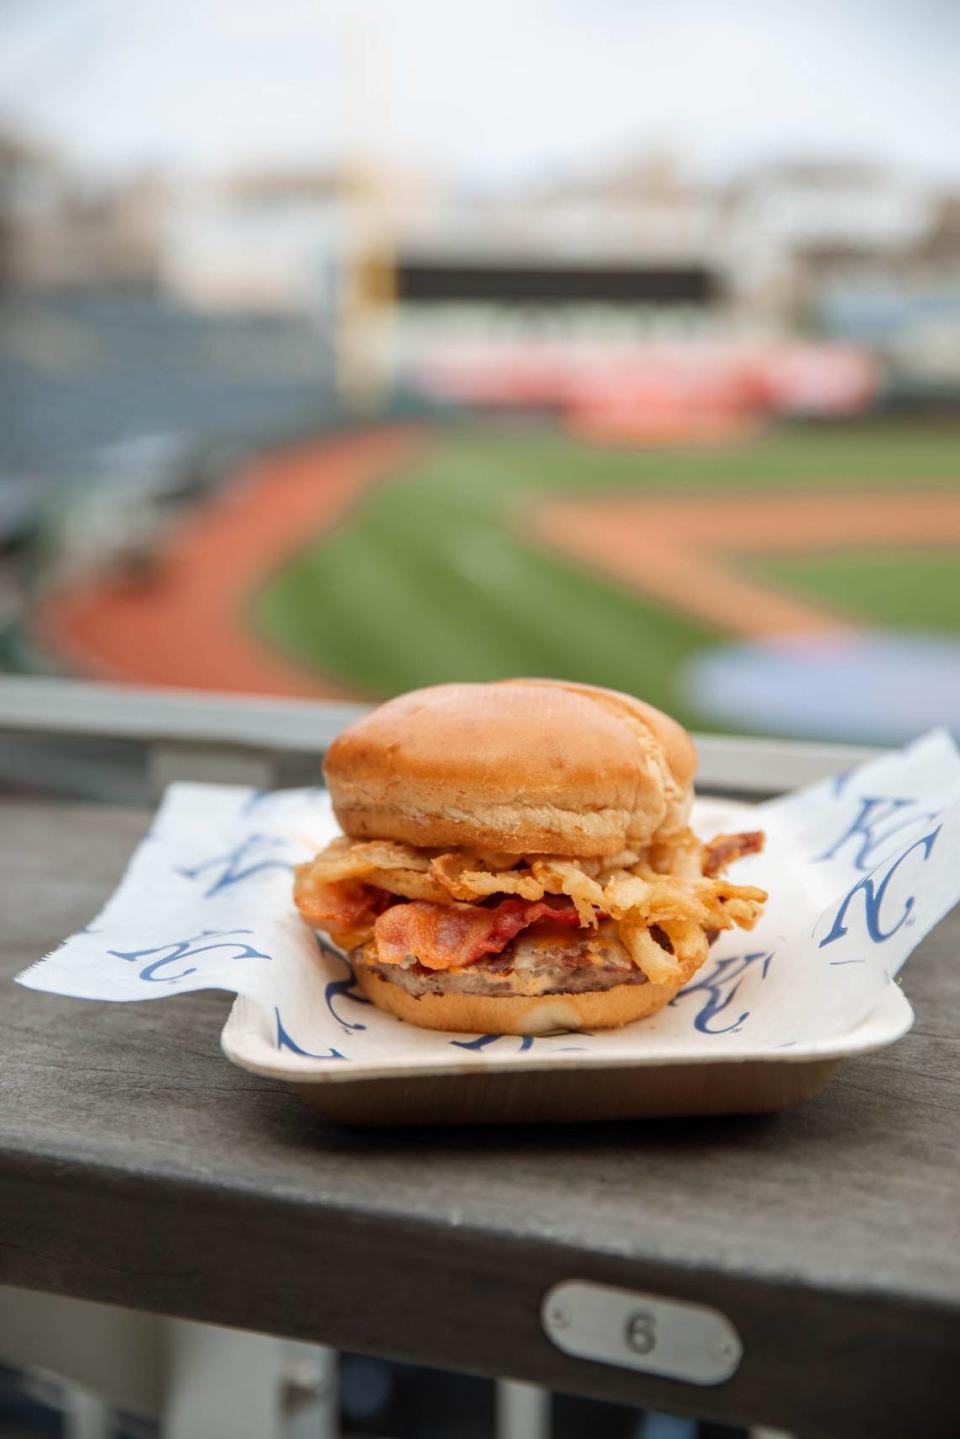 Rodeo Burgers at Bullpen Burgers will have onion rings and Bullpen sauce.